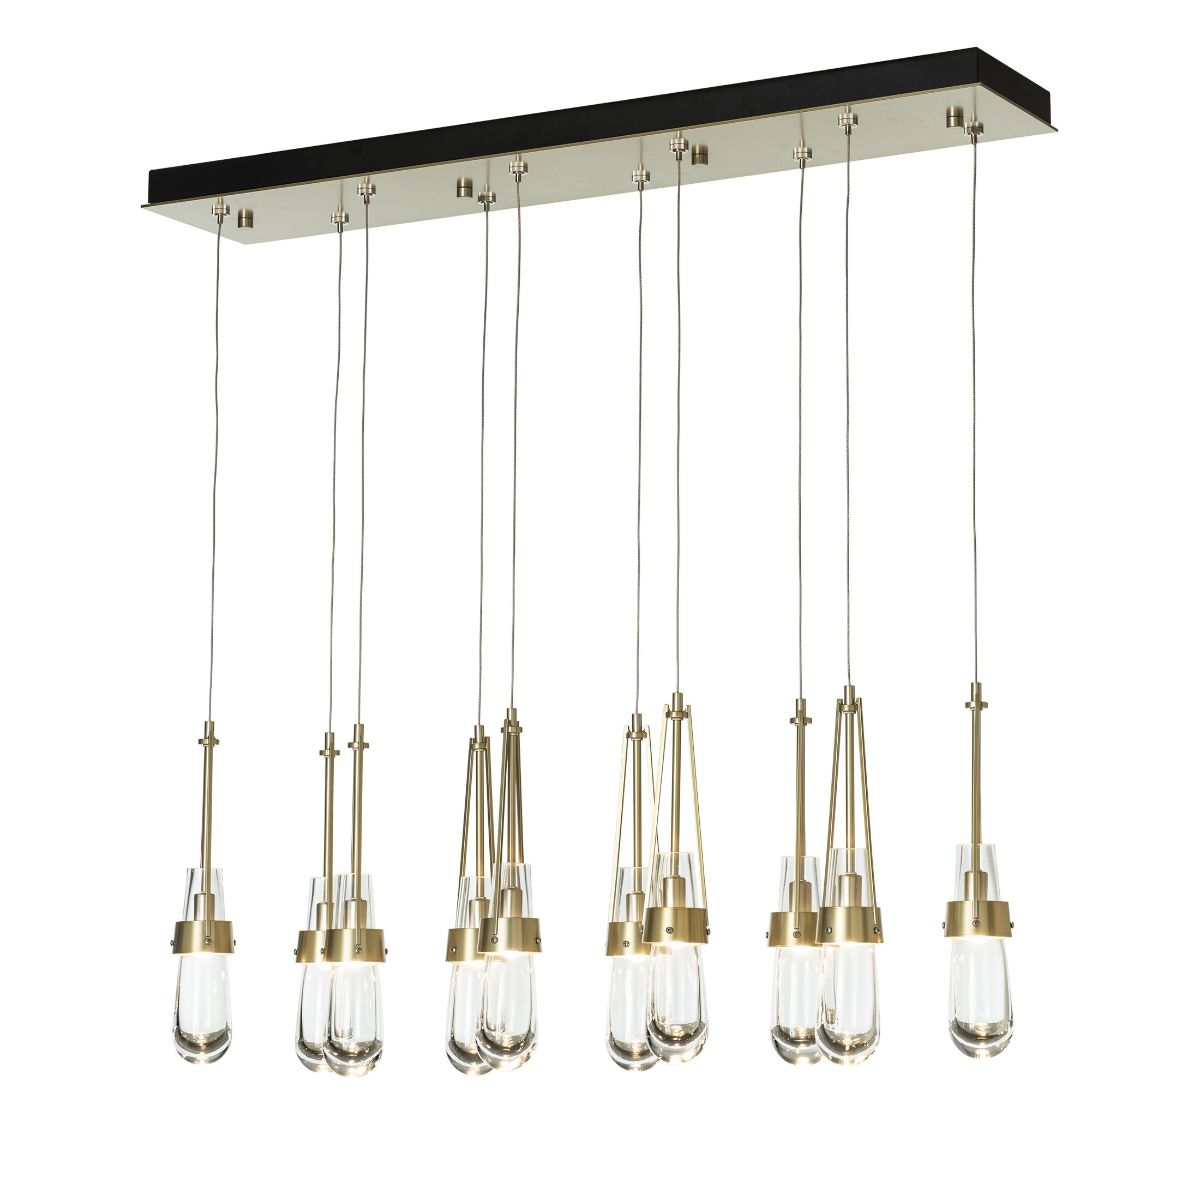 Link 45 in. 10 Lights Linear Pendant Light with Standard Height